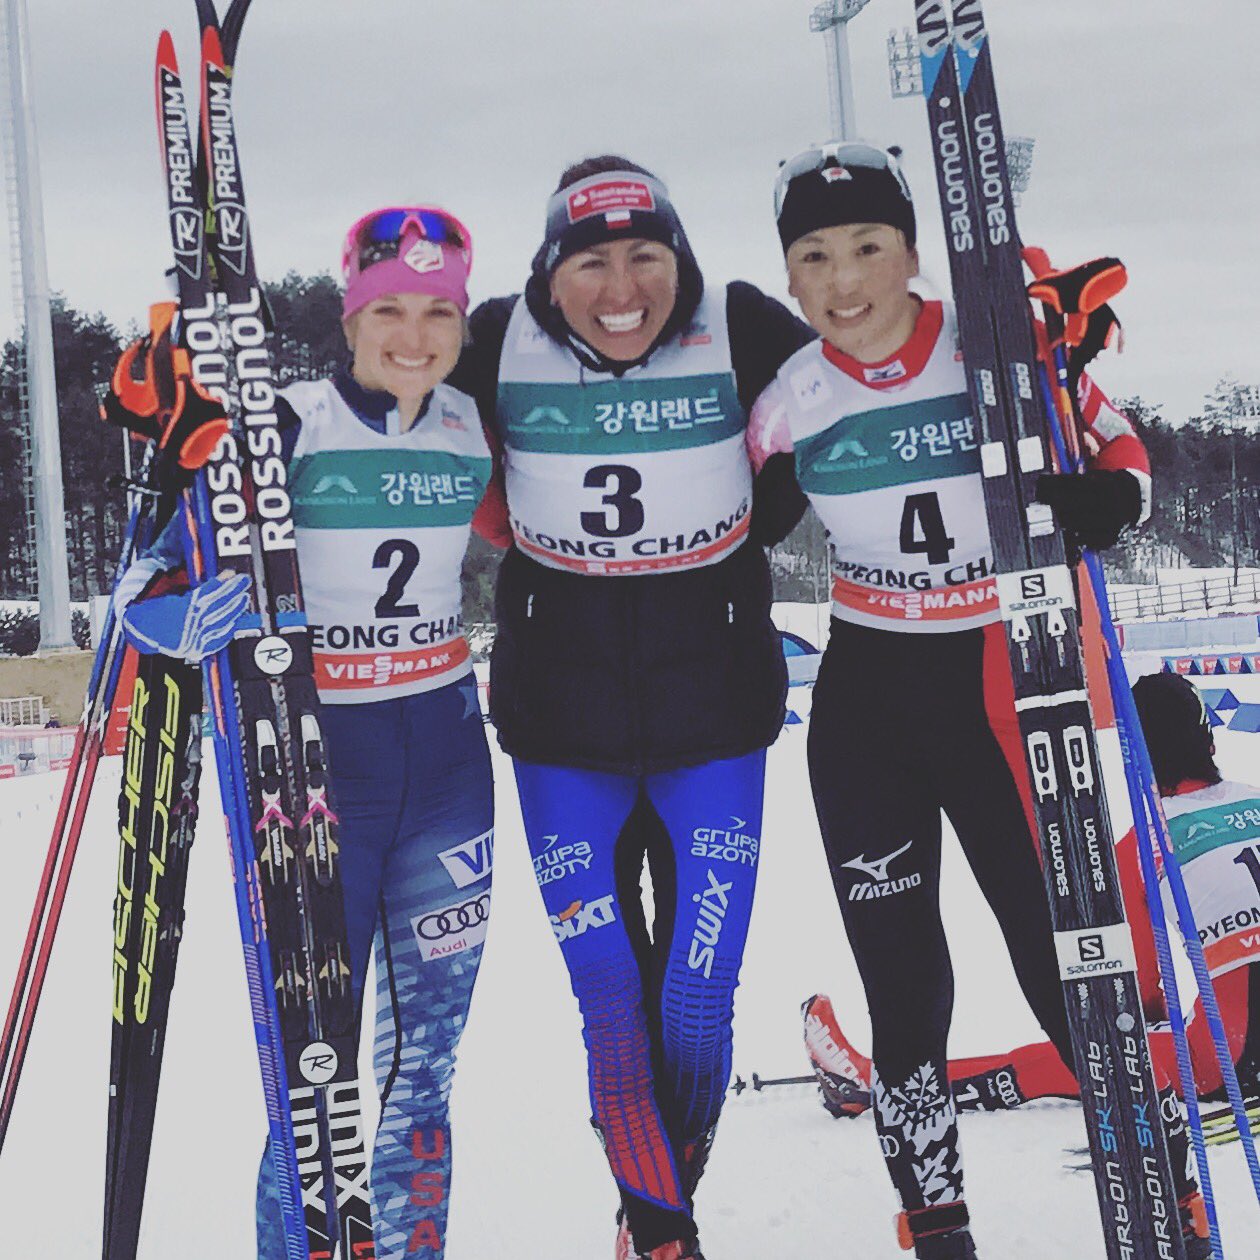 The women's 15 k skiathlon podium at the PyeongChang World Cup in South Korea, with Poland's Justyna Kowalczyk (c) in first, American Liz Stephen (l) in second, and Japan's Masako Ishida in third. (Photo: FIS Cross Country/Twitter) 